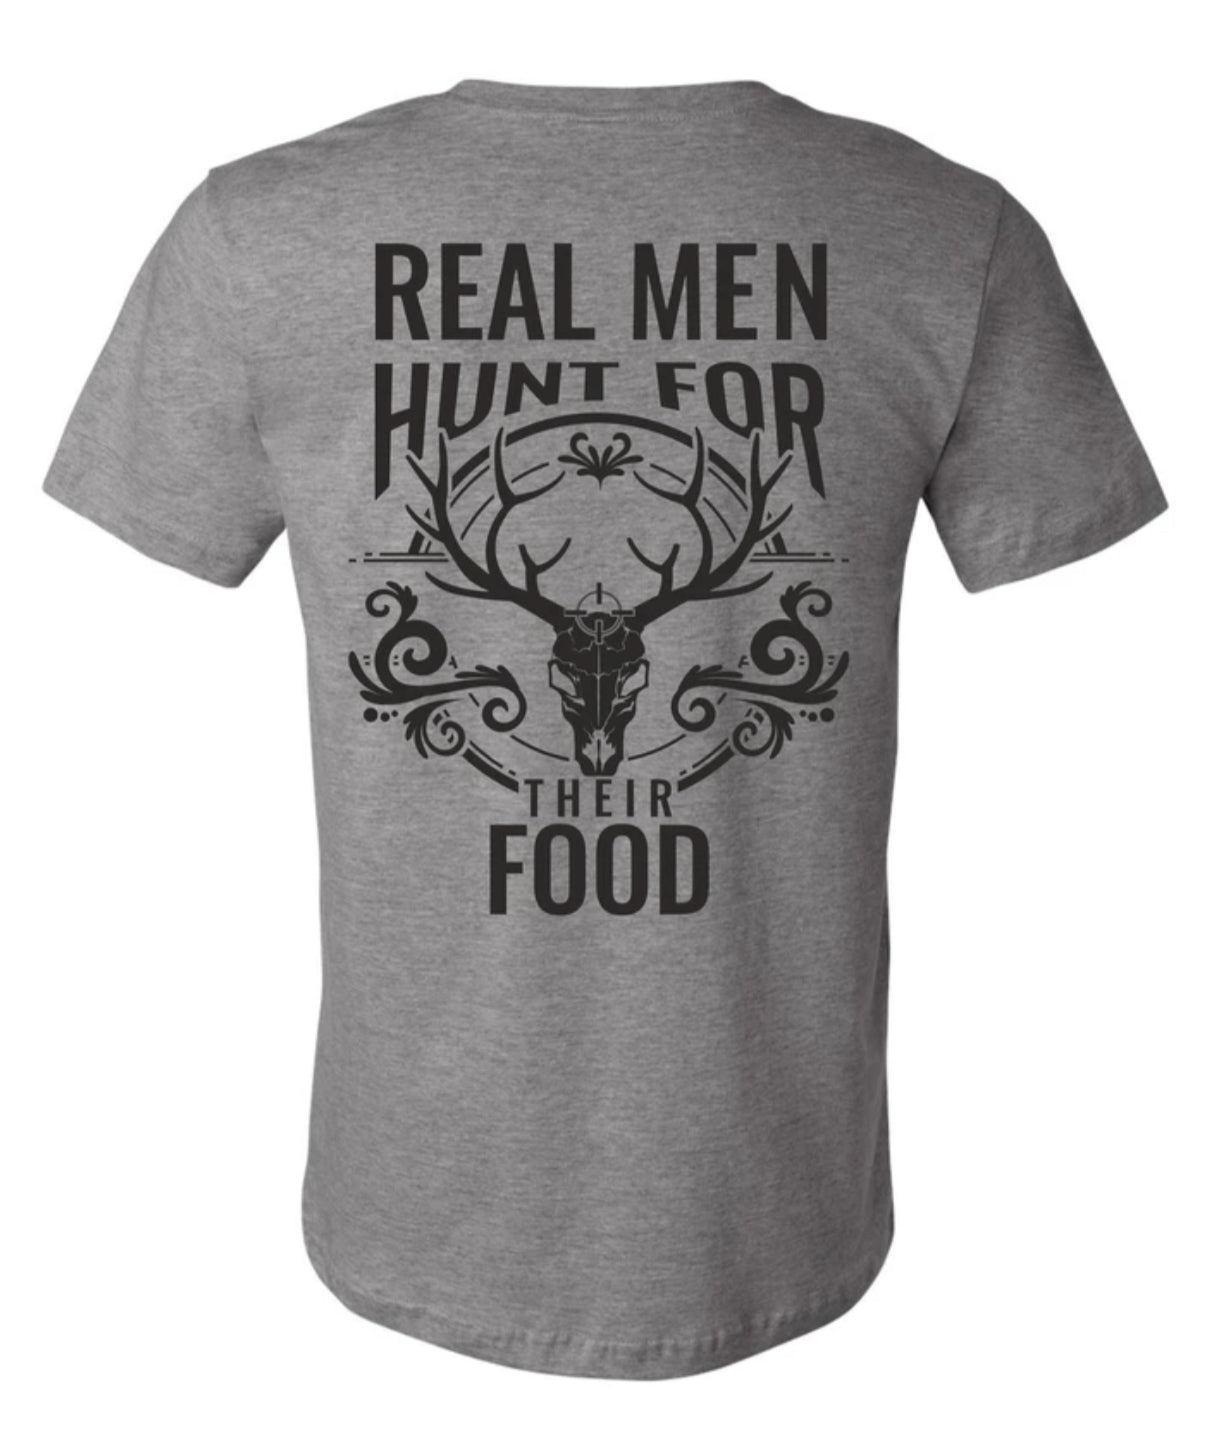 REAL MEN HUNT FOR THEIR OWN FOOD